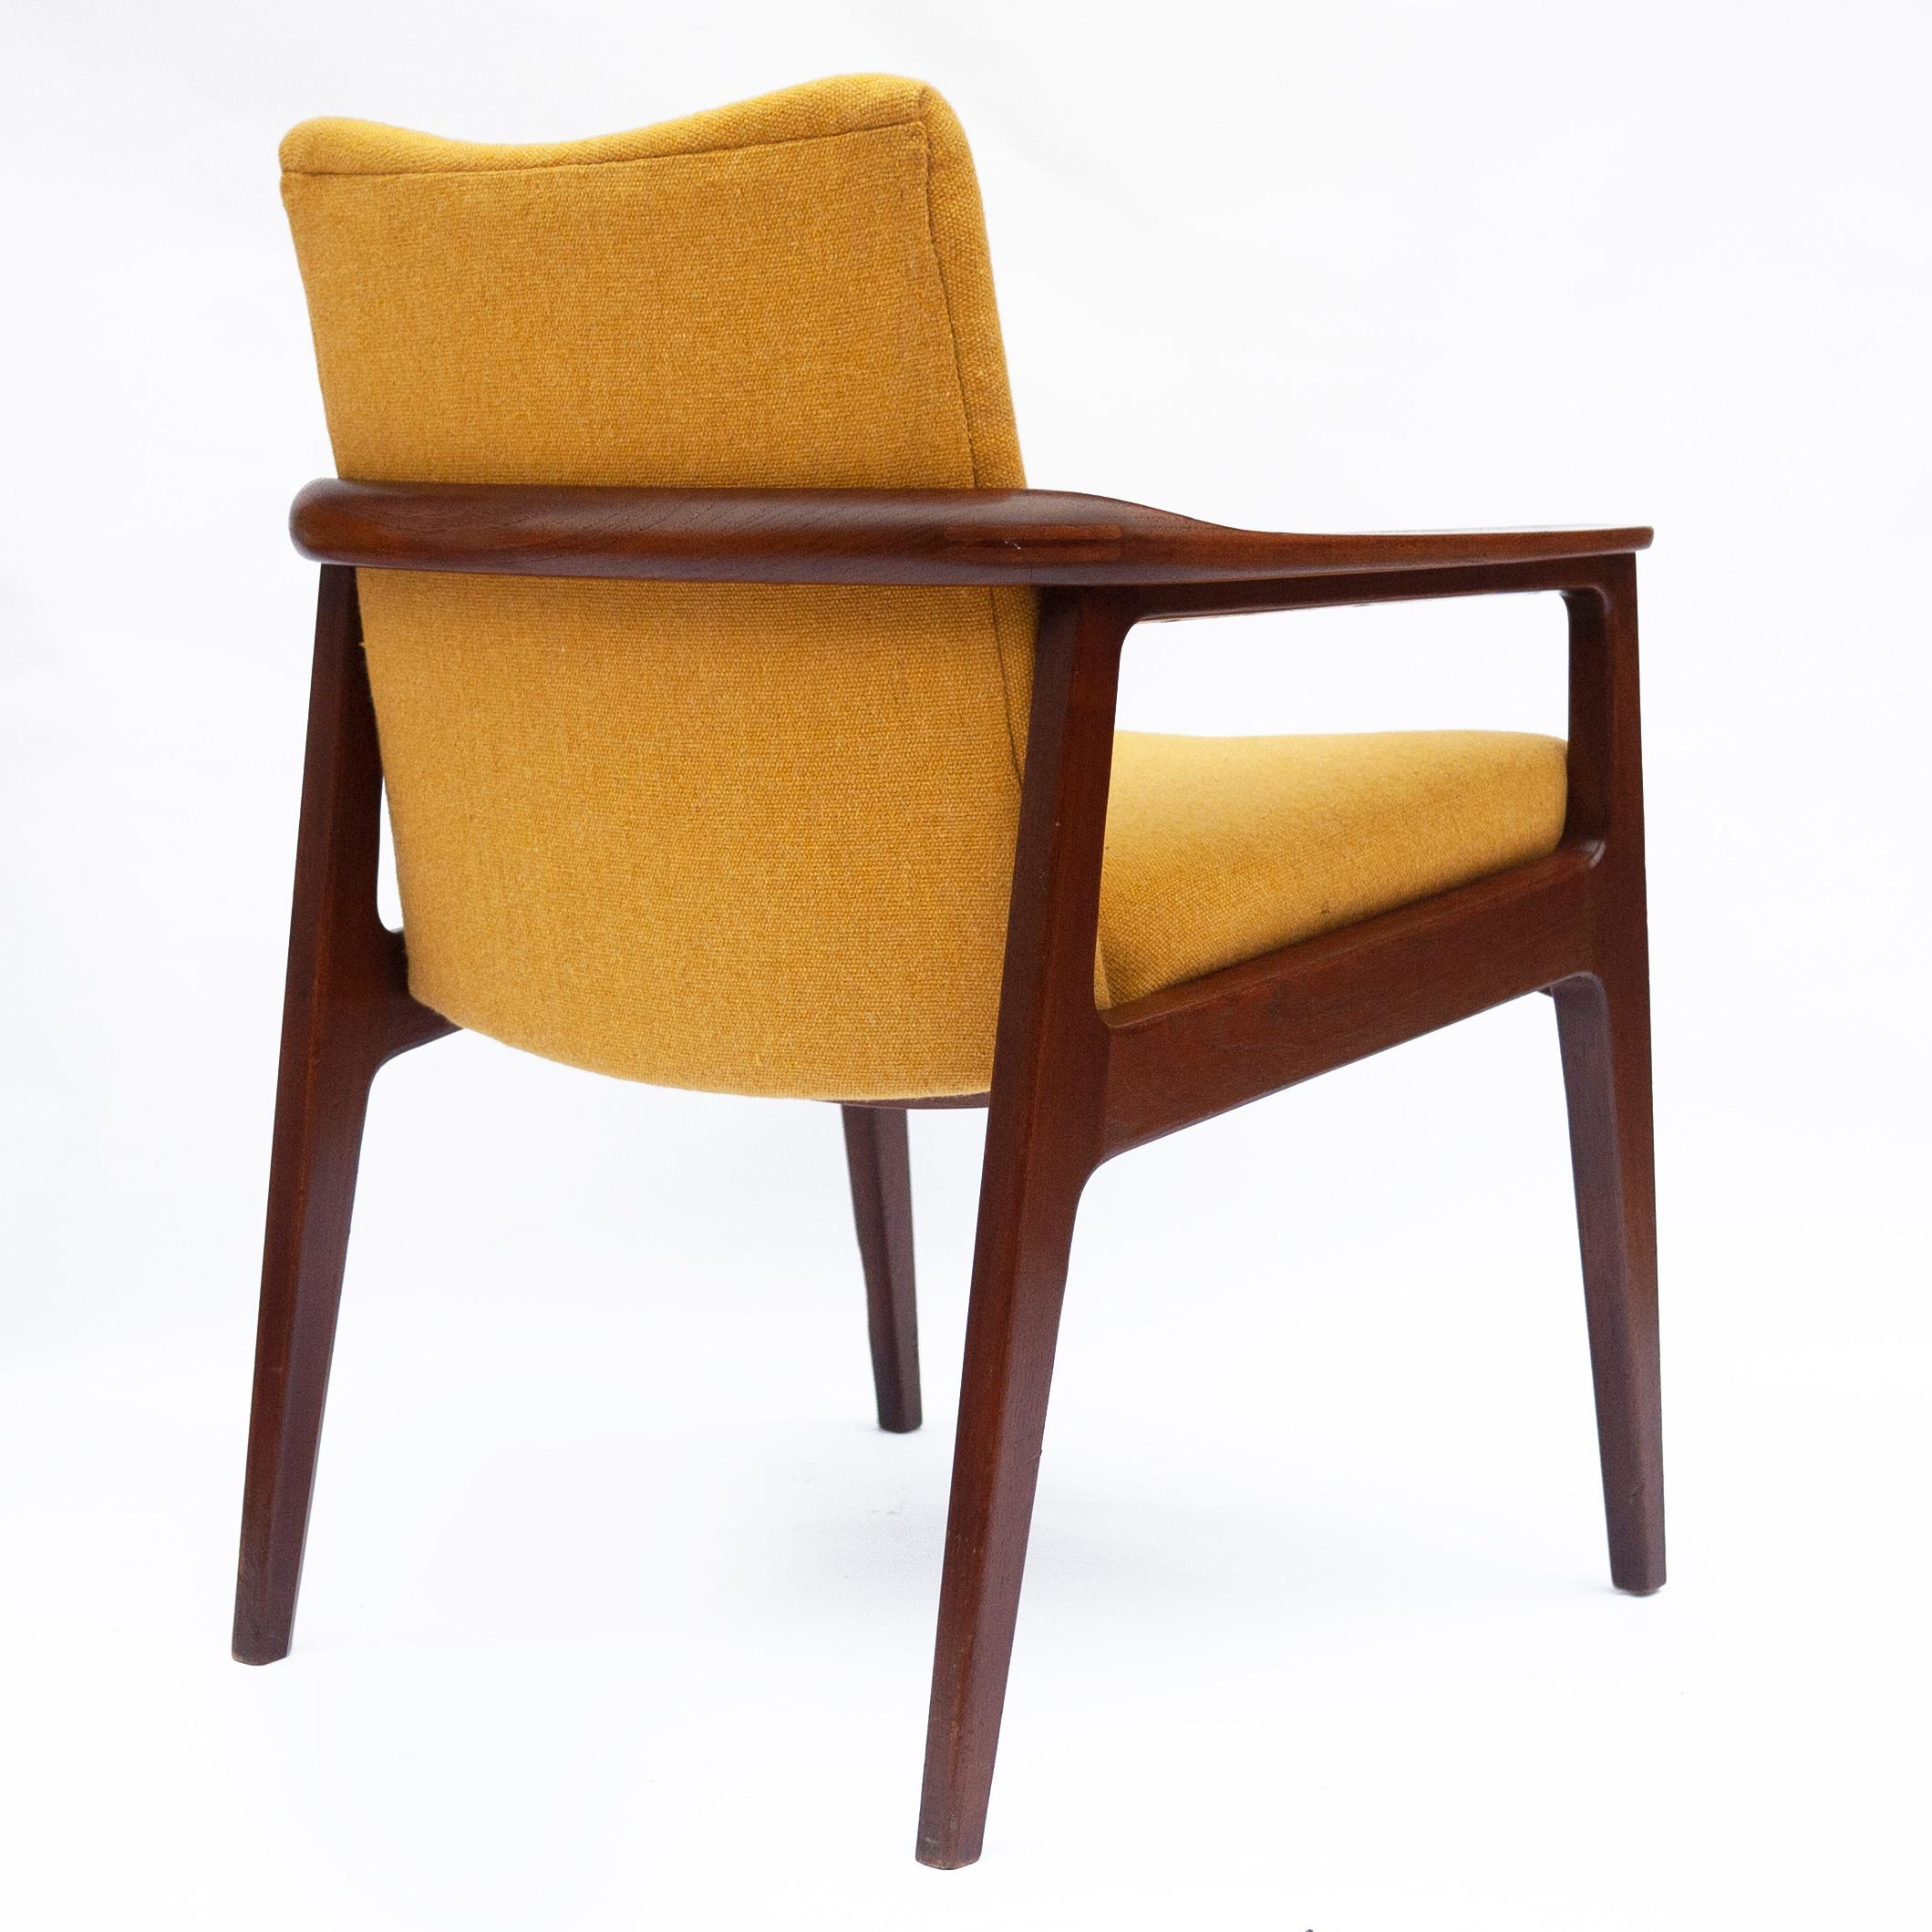 Fabric Mid-Century Teak Armchair with Yellow Upholstery by Sigvard Bernadotte